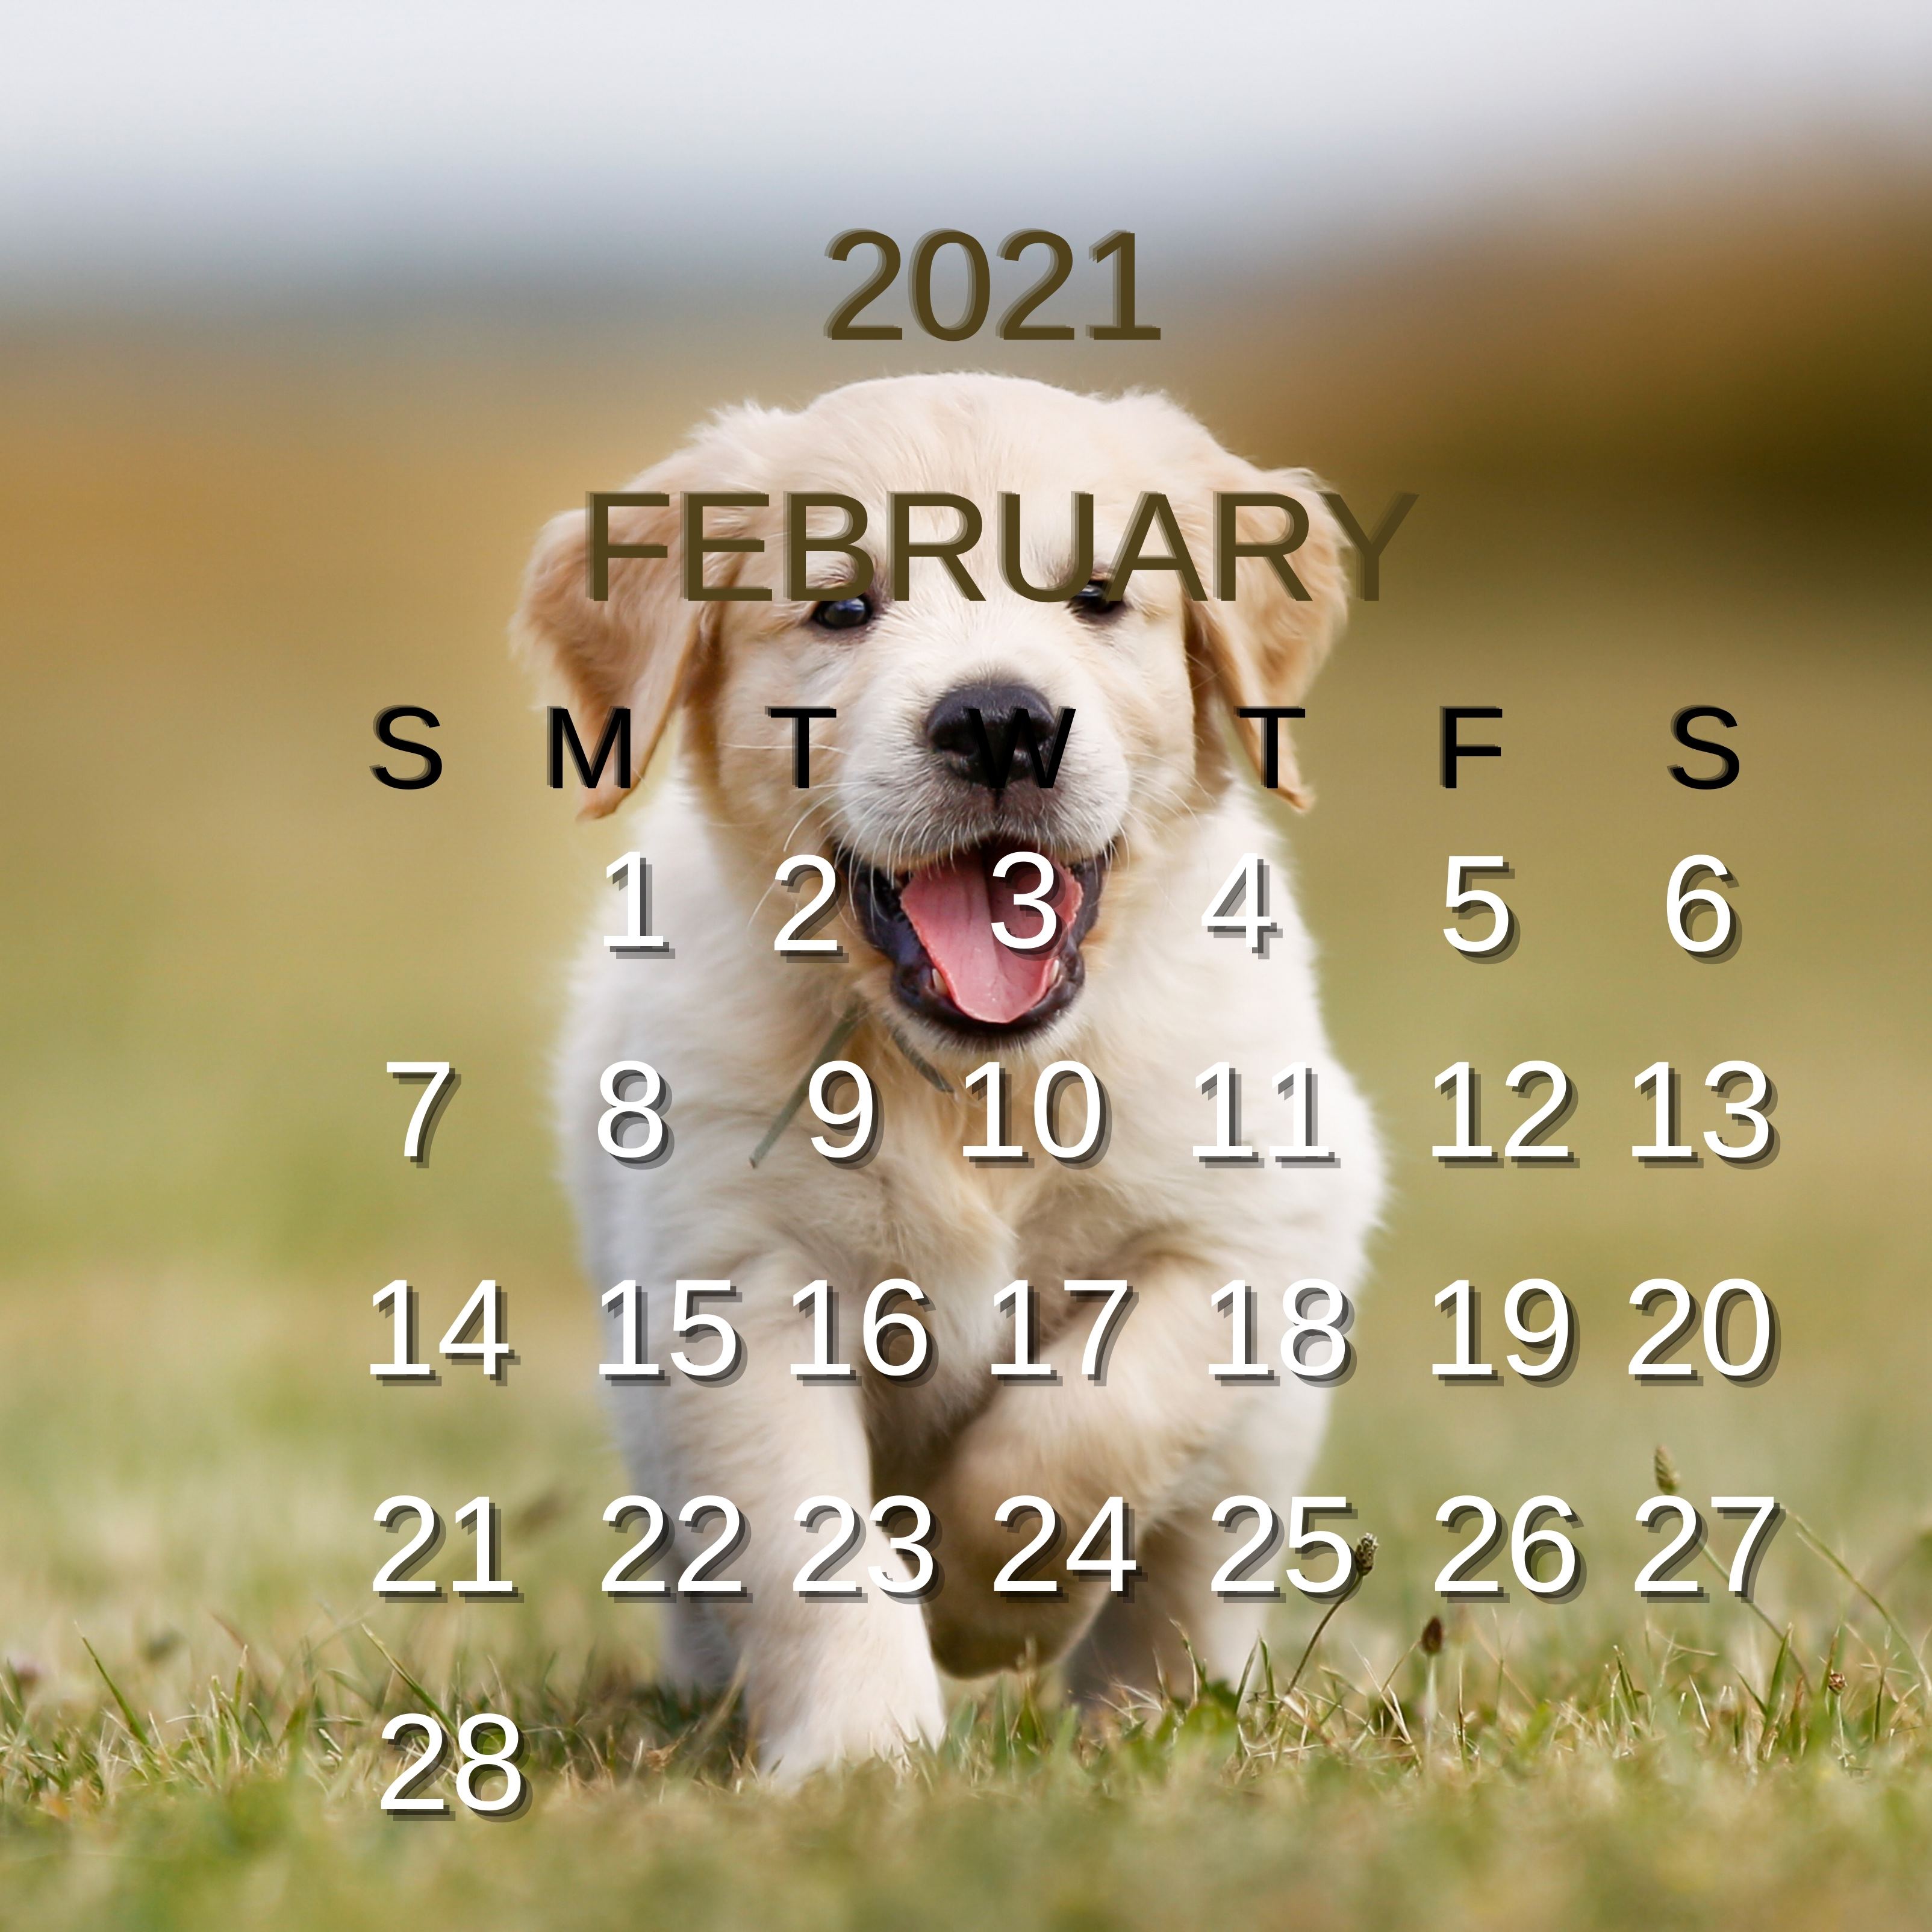 iPad Wallpapers February 2021 Calendar White Puppy Playing iPad Wallpaper 3208x3208 px